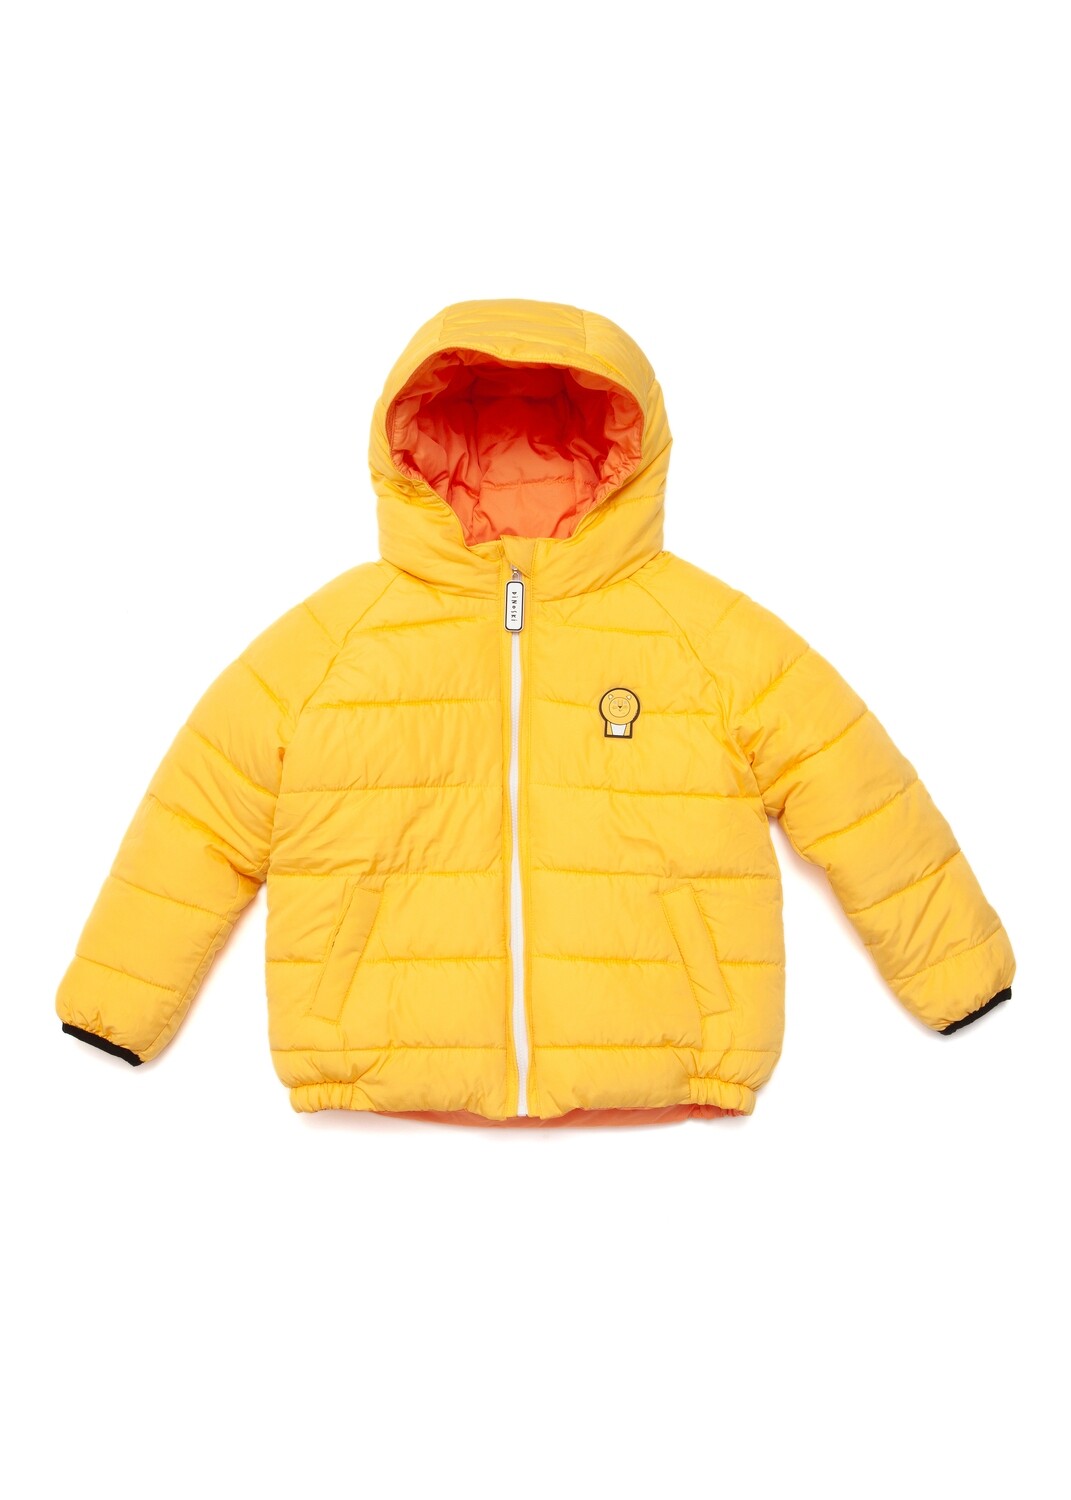 Reversible Puffer Lion X Tiger, Age: Age 1-2